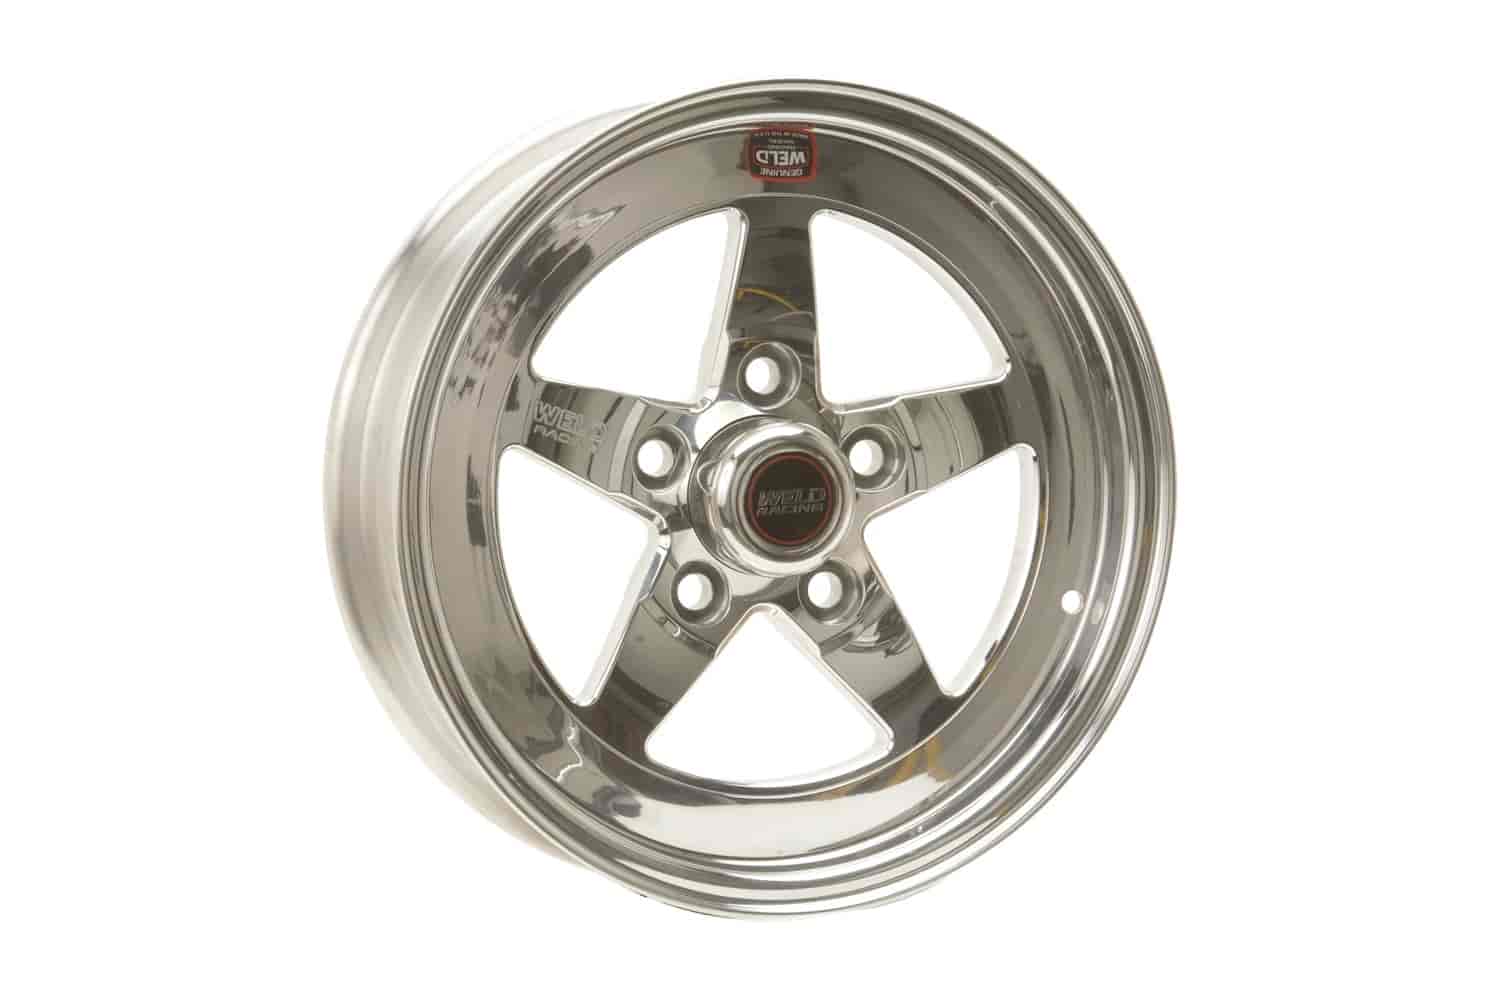 RT-S Series Wheel Size: 15" x 8" Bolt Circle: 5 x 4-3/4" Back Space: 4-1/2"